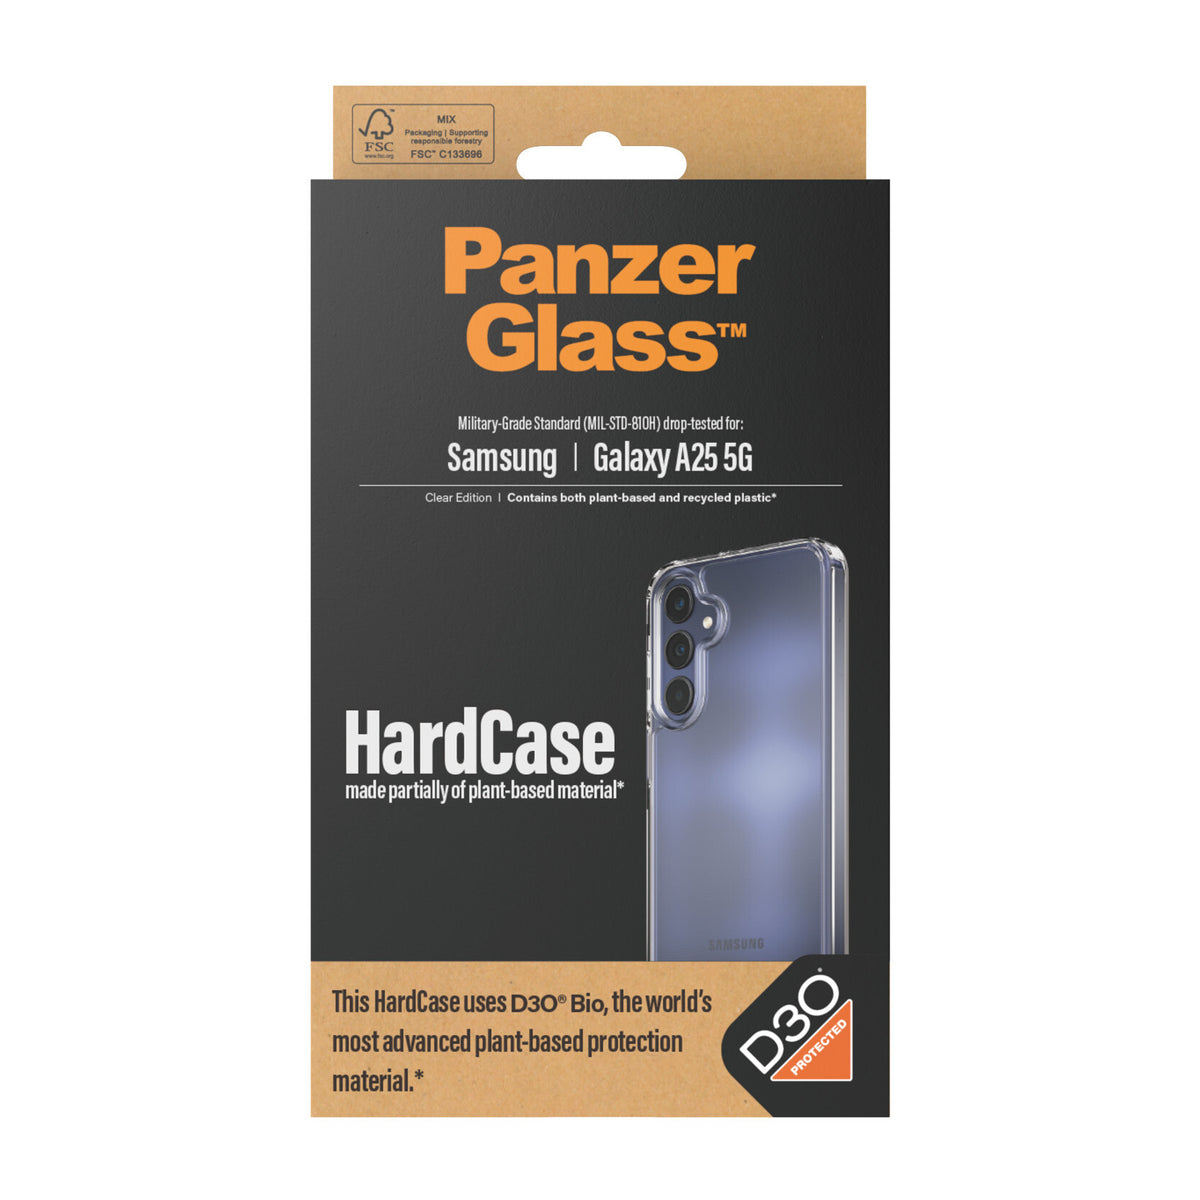 PanzerGlass ® HardCase with D3O for Galaxy A25 (5G) in Transparent